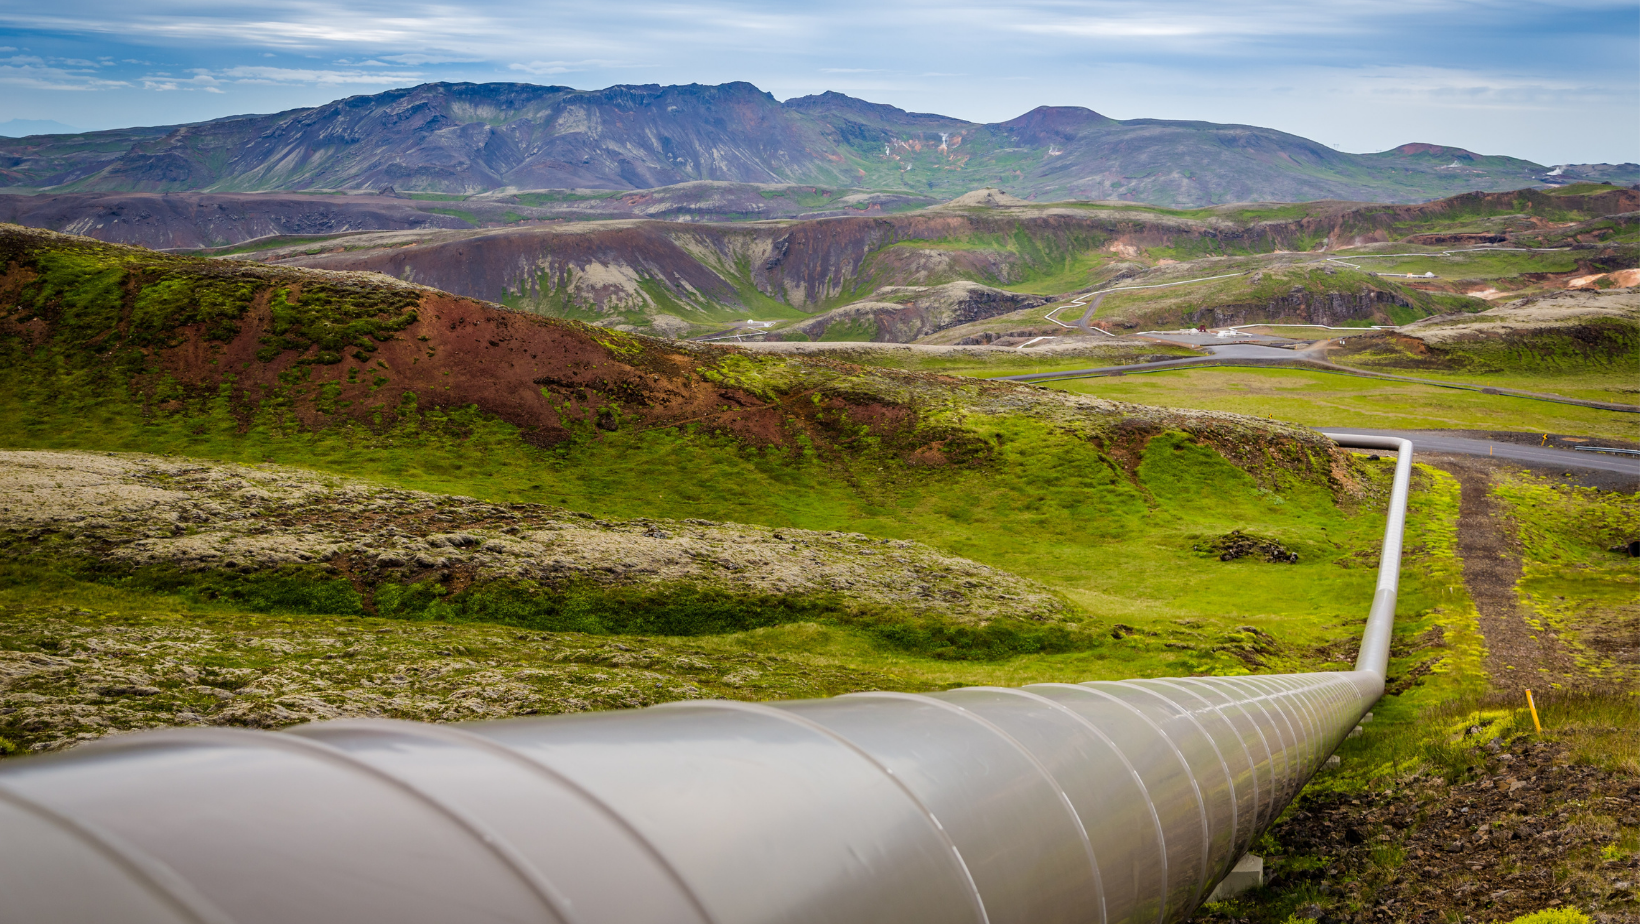 oil and gas pipeline